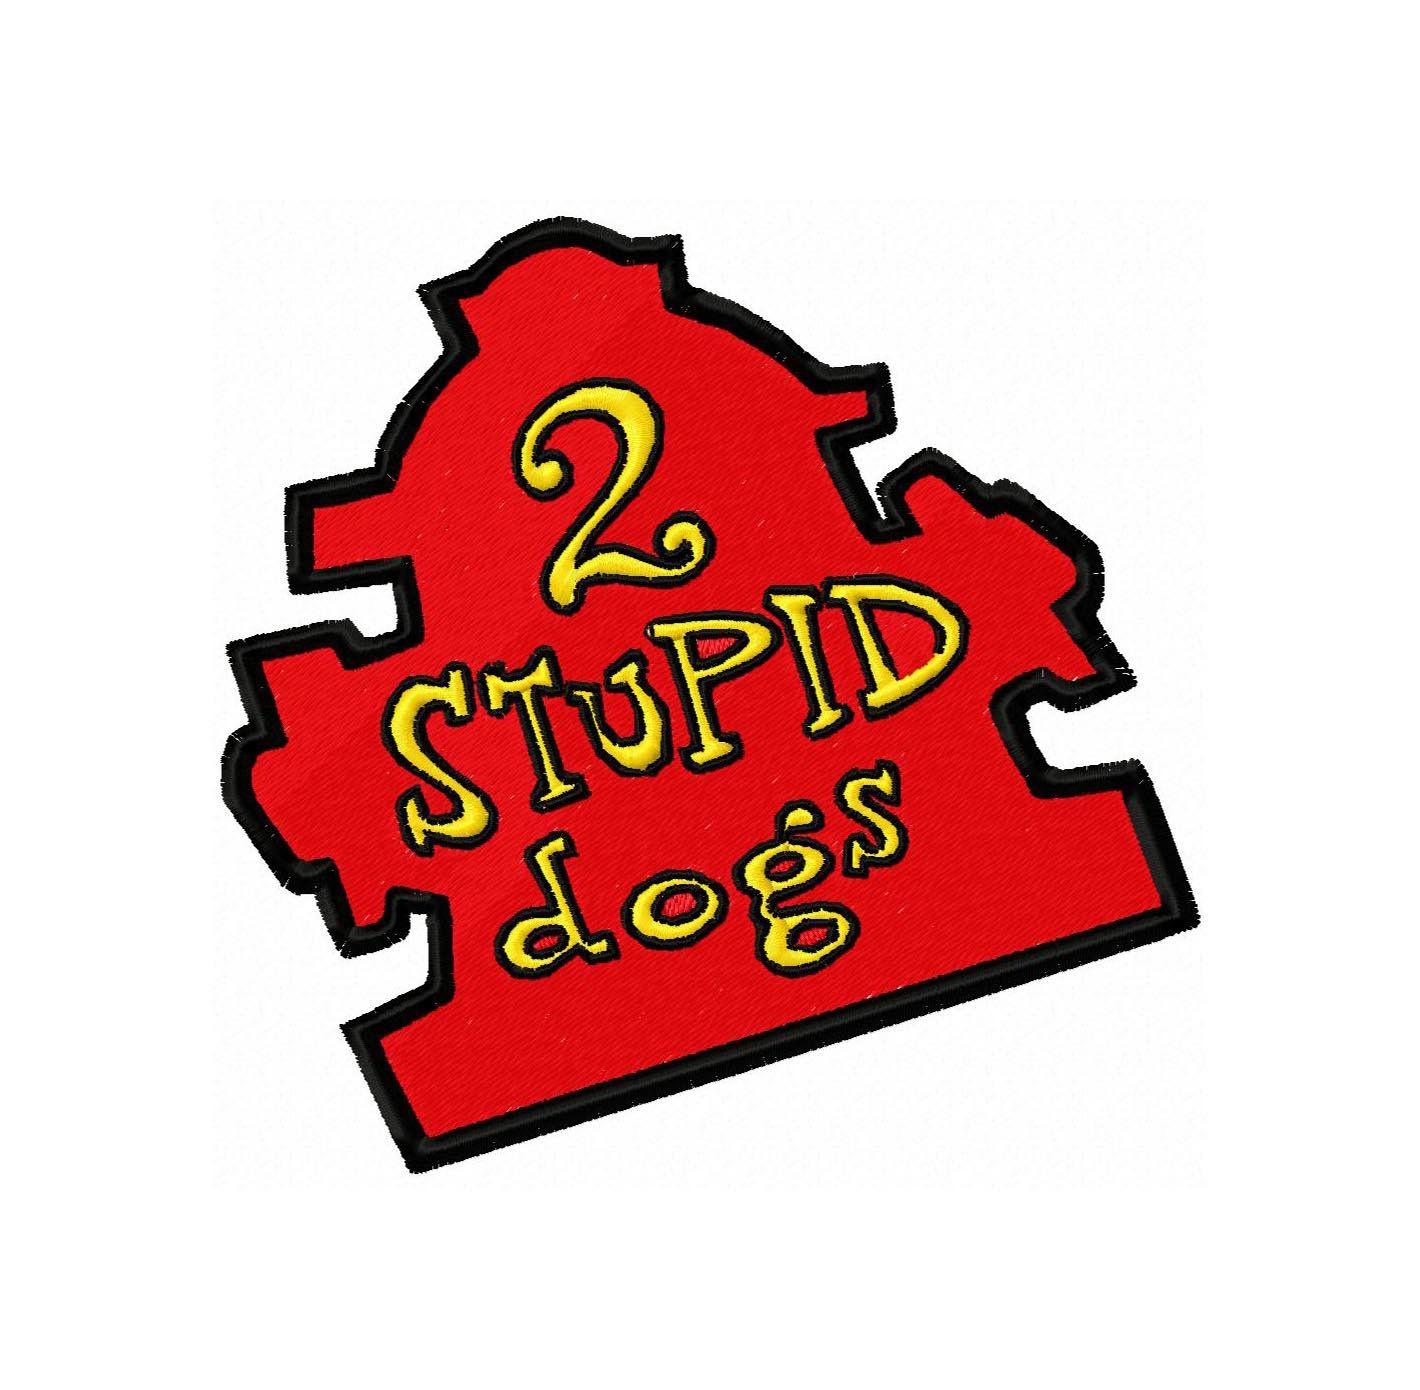 Stupid Logo - 2 Stupid Dogs Logo Embroidery Design Instant Download | Etsy